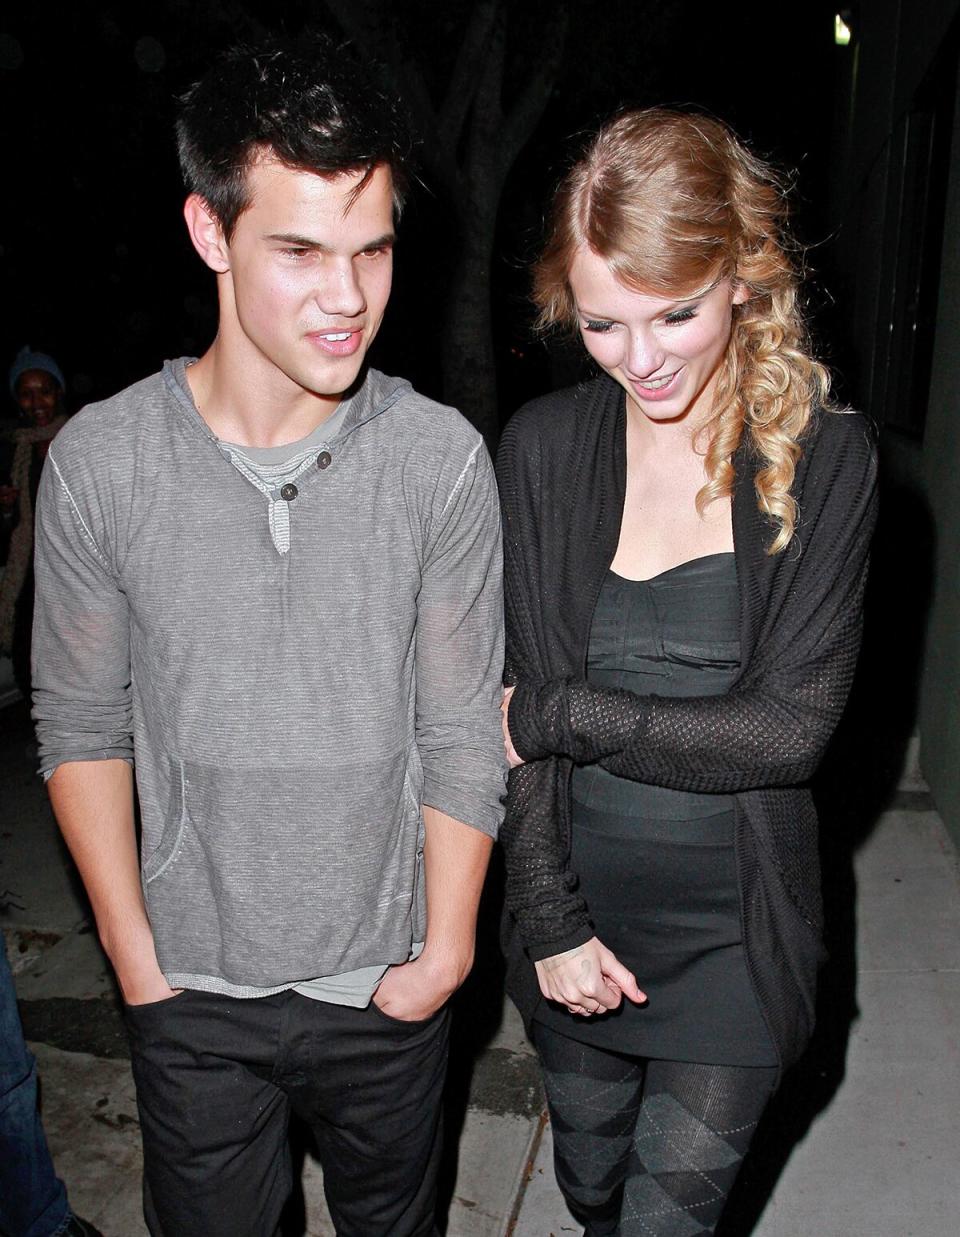 12-03-09 Beverly Hills, CA Taylor Swift and Taylor Lautner spotted leaving dinner at Benihana and heading over to Menchies Yogurt for some ice cream in Beverly Hills, CA....